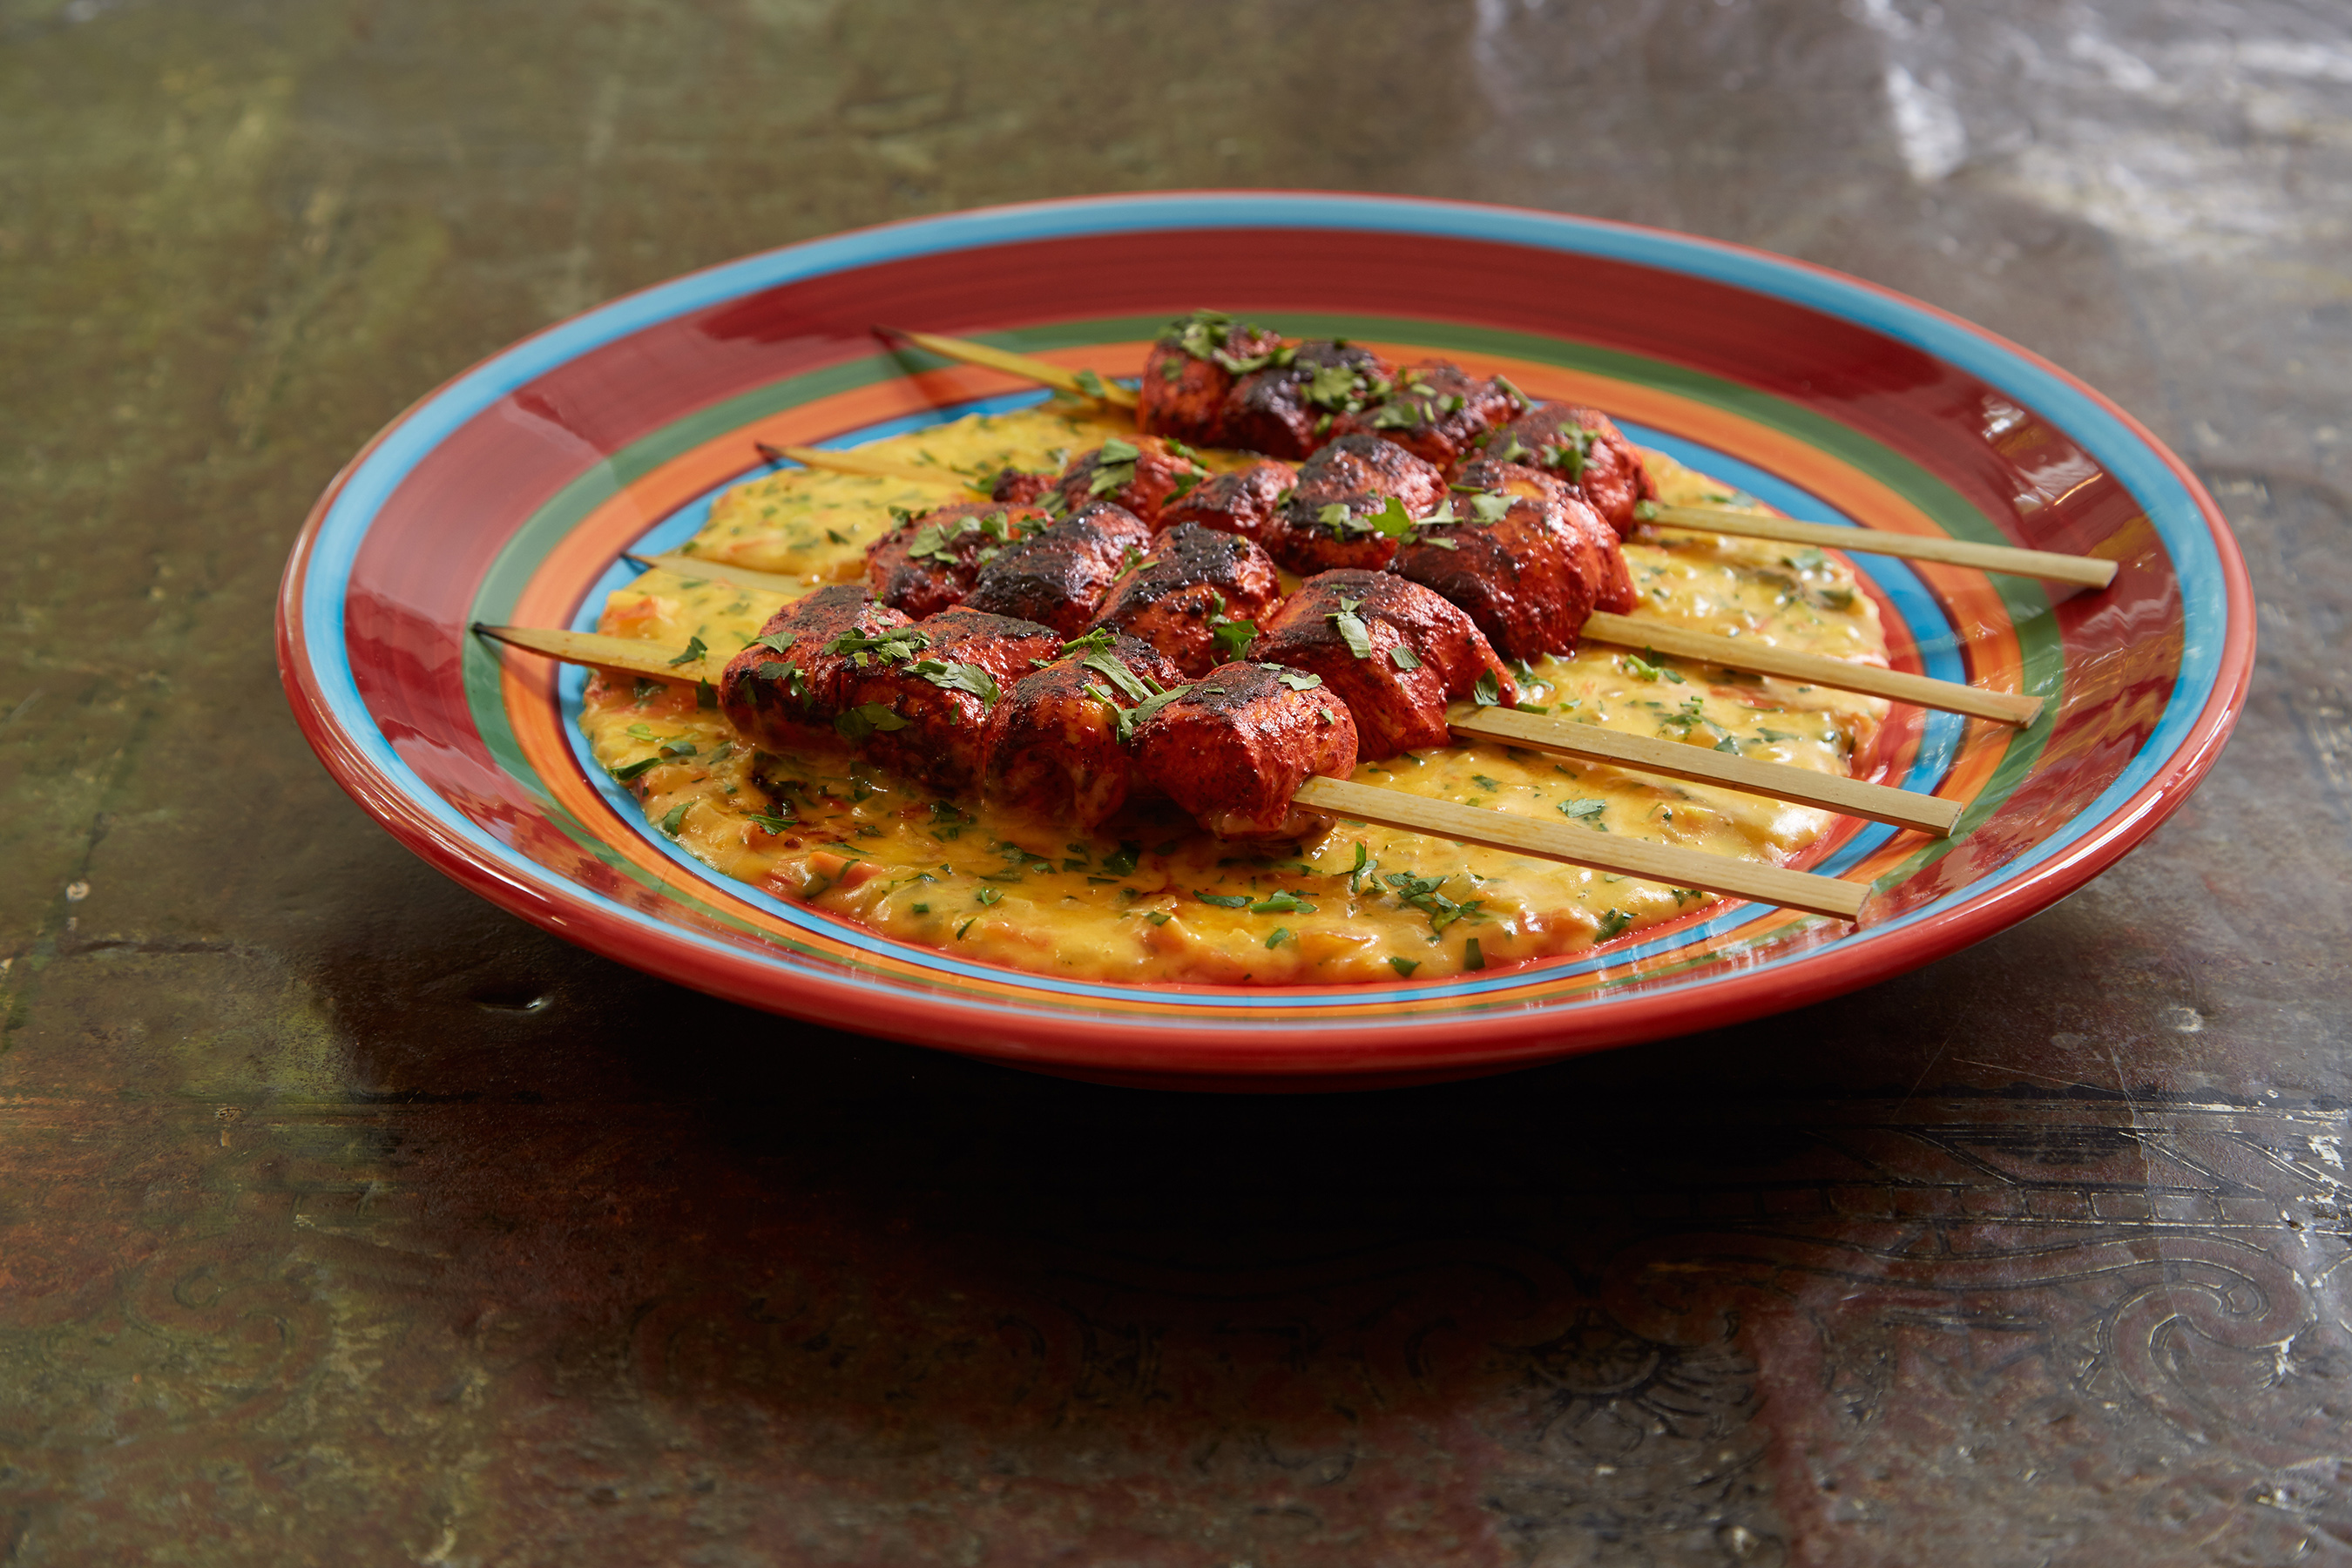 Looking for a bit of spice? Try these pan roasted achiote-rubbed chicken skewers with Crystal Farms® Oaxaca cheese sauce.